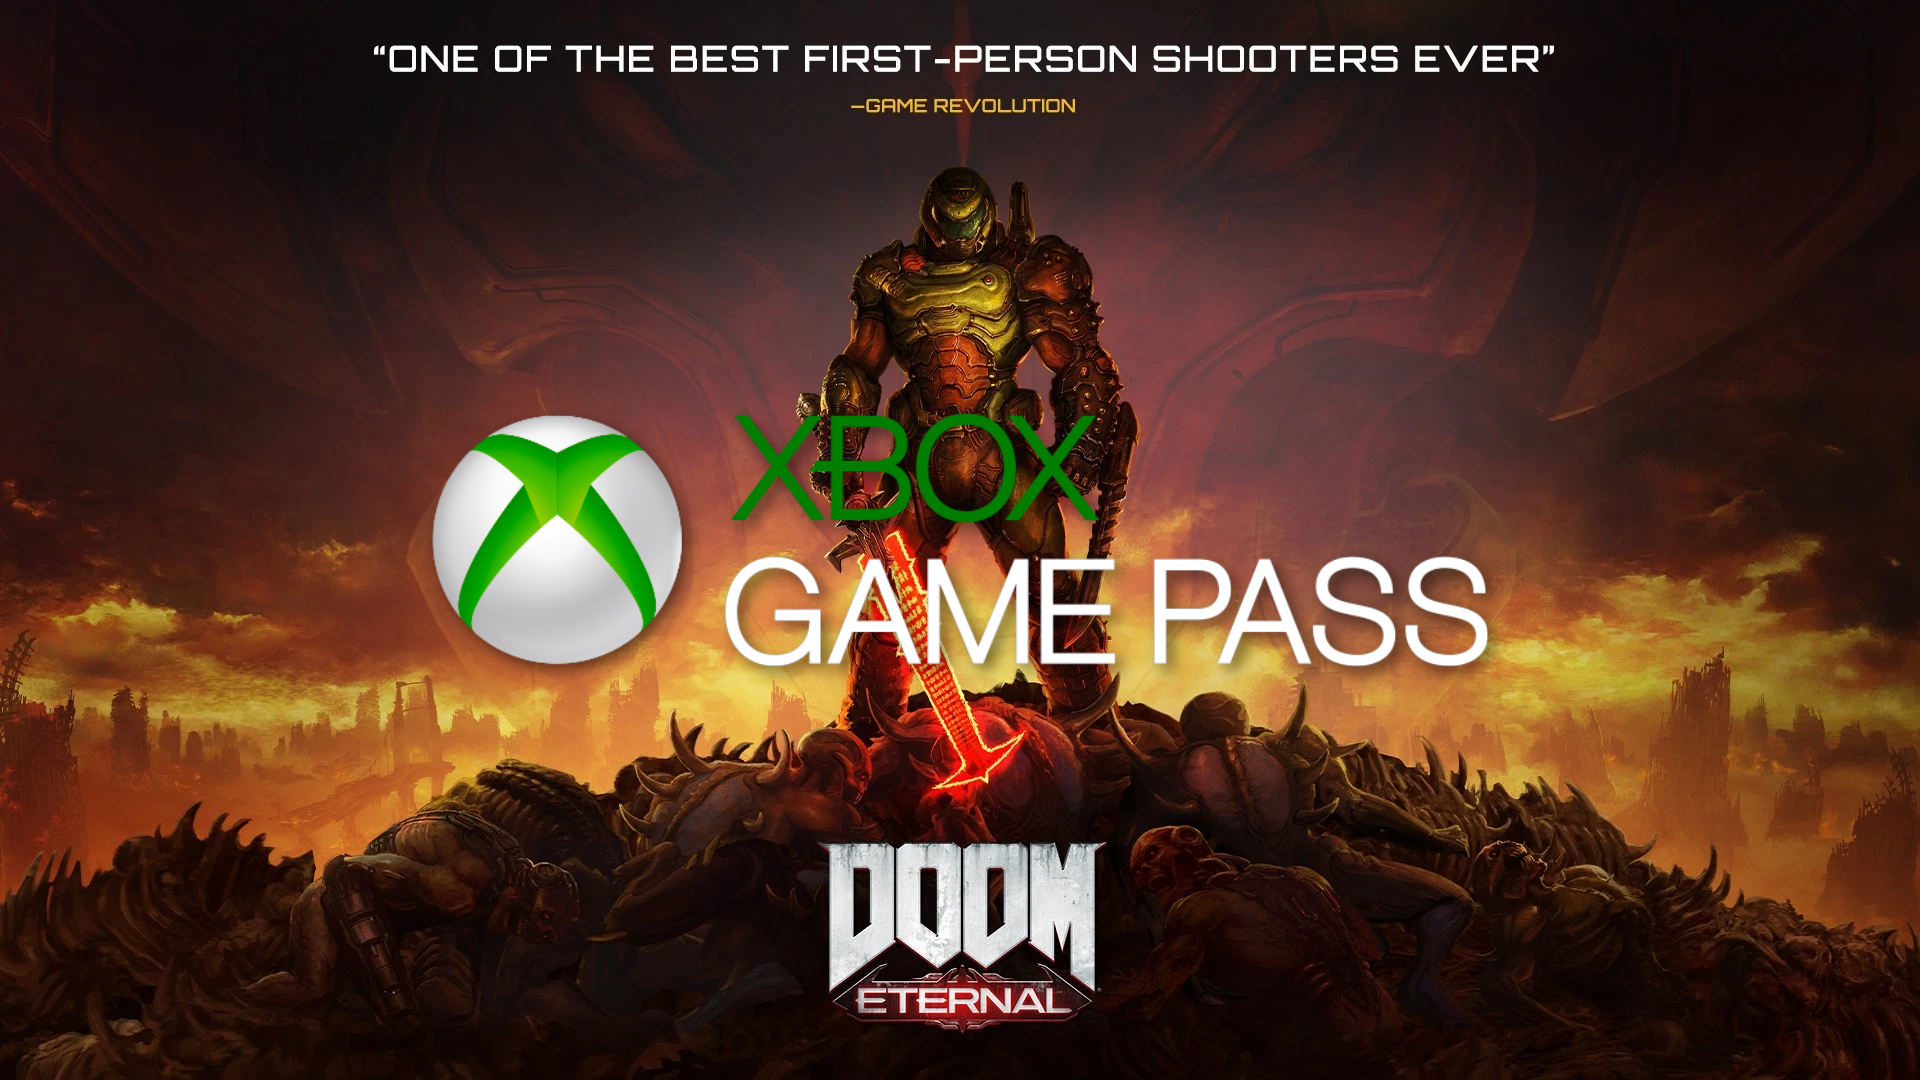 Welcome to Xbox Game Pass for PC 